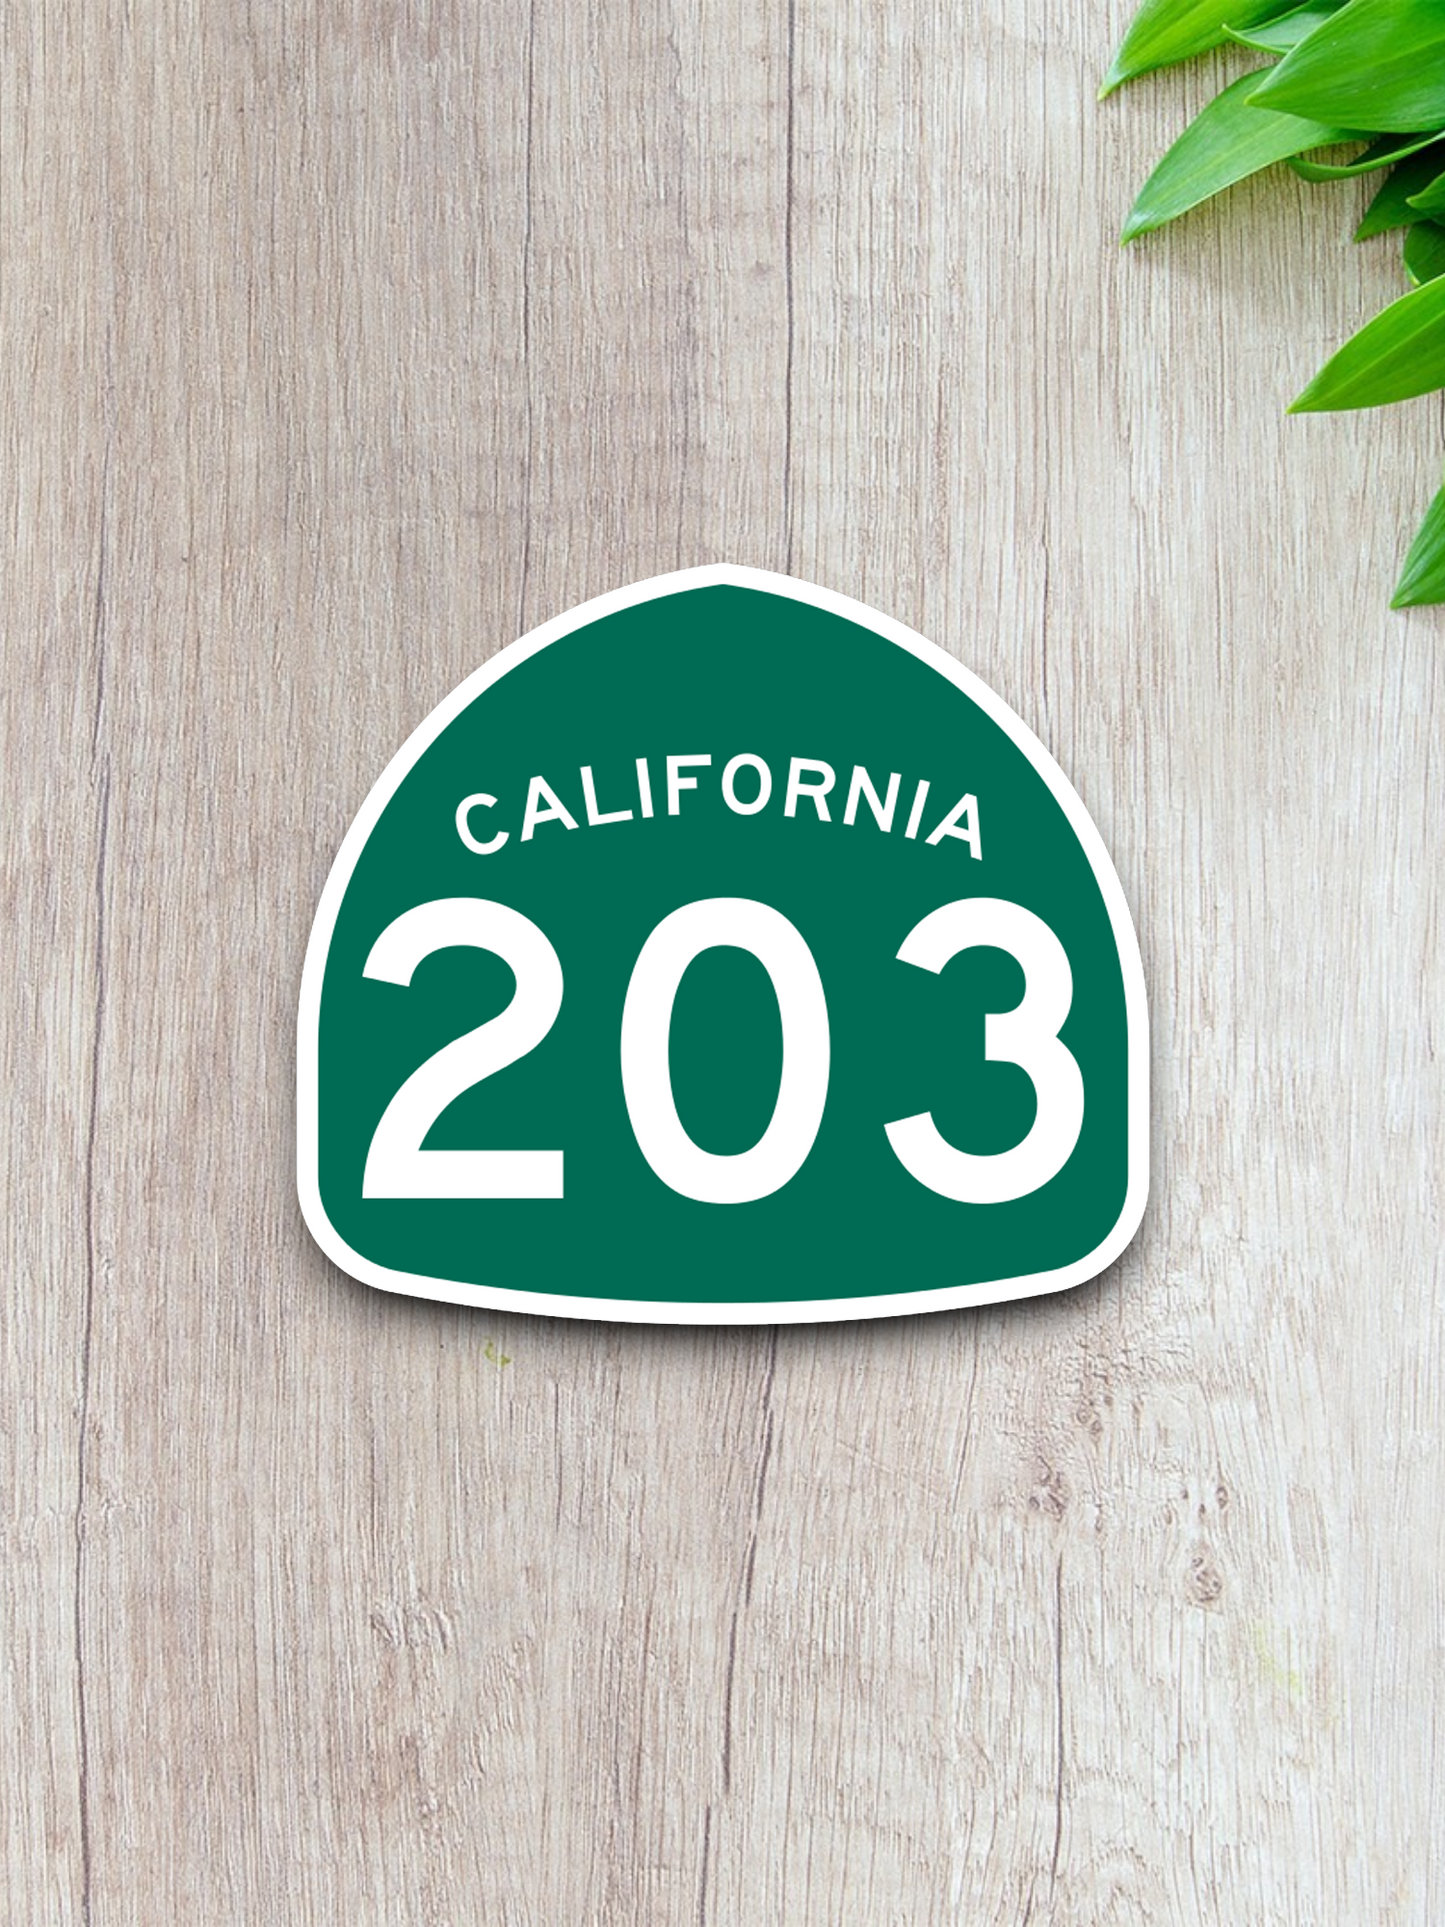 California State Route 203 Road Sign Sticker